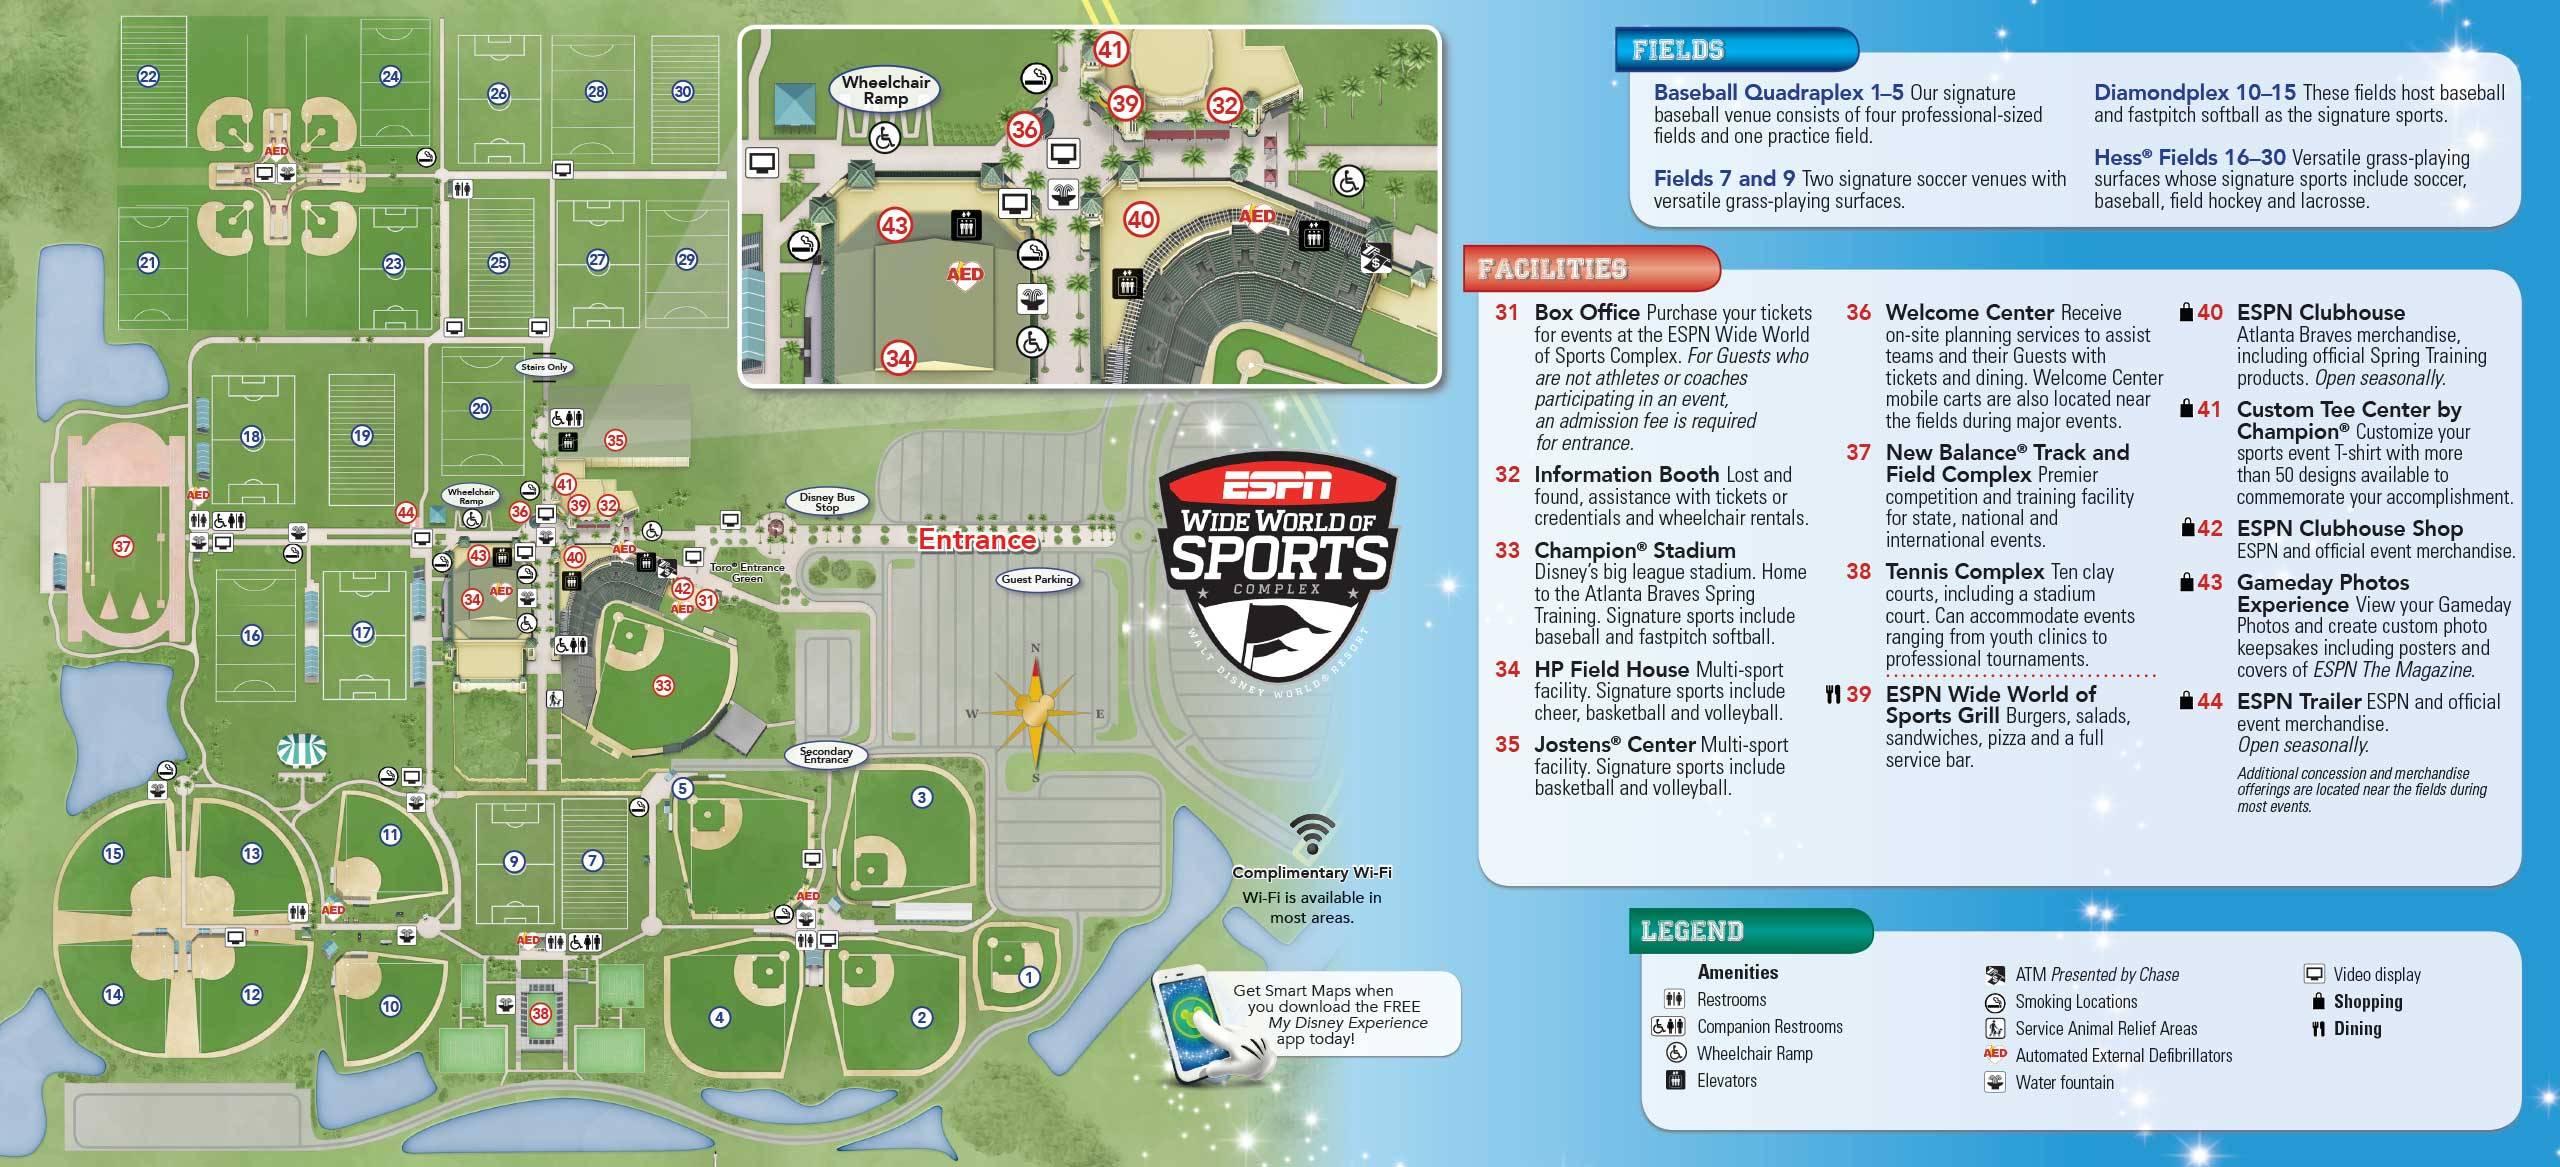 ESPN World of Sports Guide Map May 2015 - Back